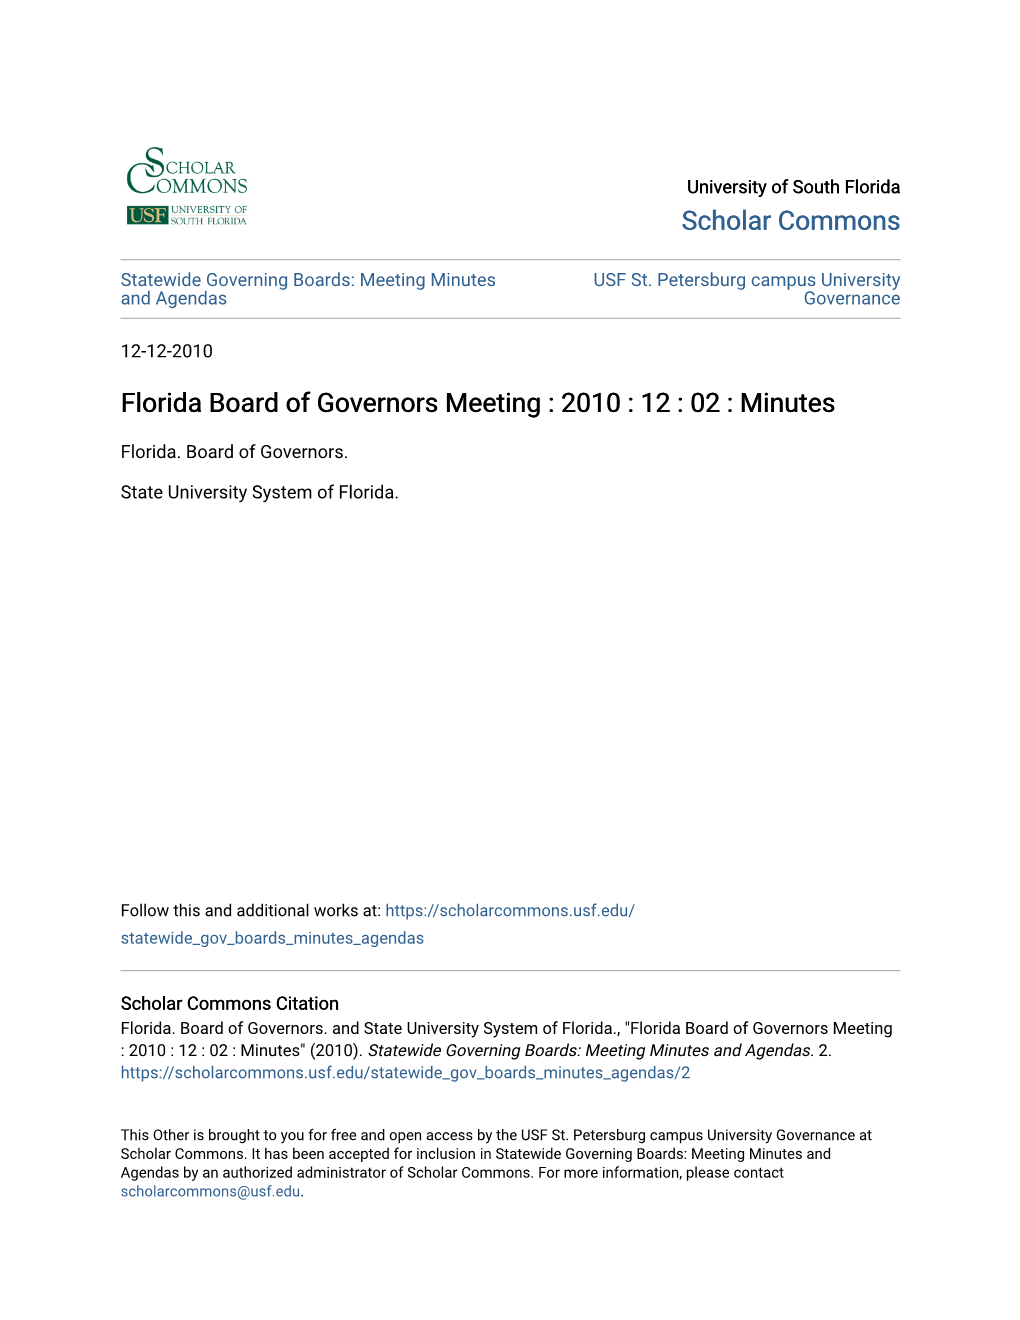 Florida Board of Governors Meeting : 2010 : 12 : 02 : Minutes